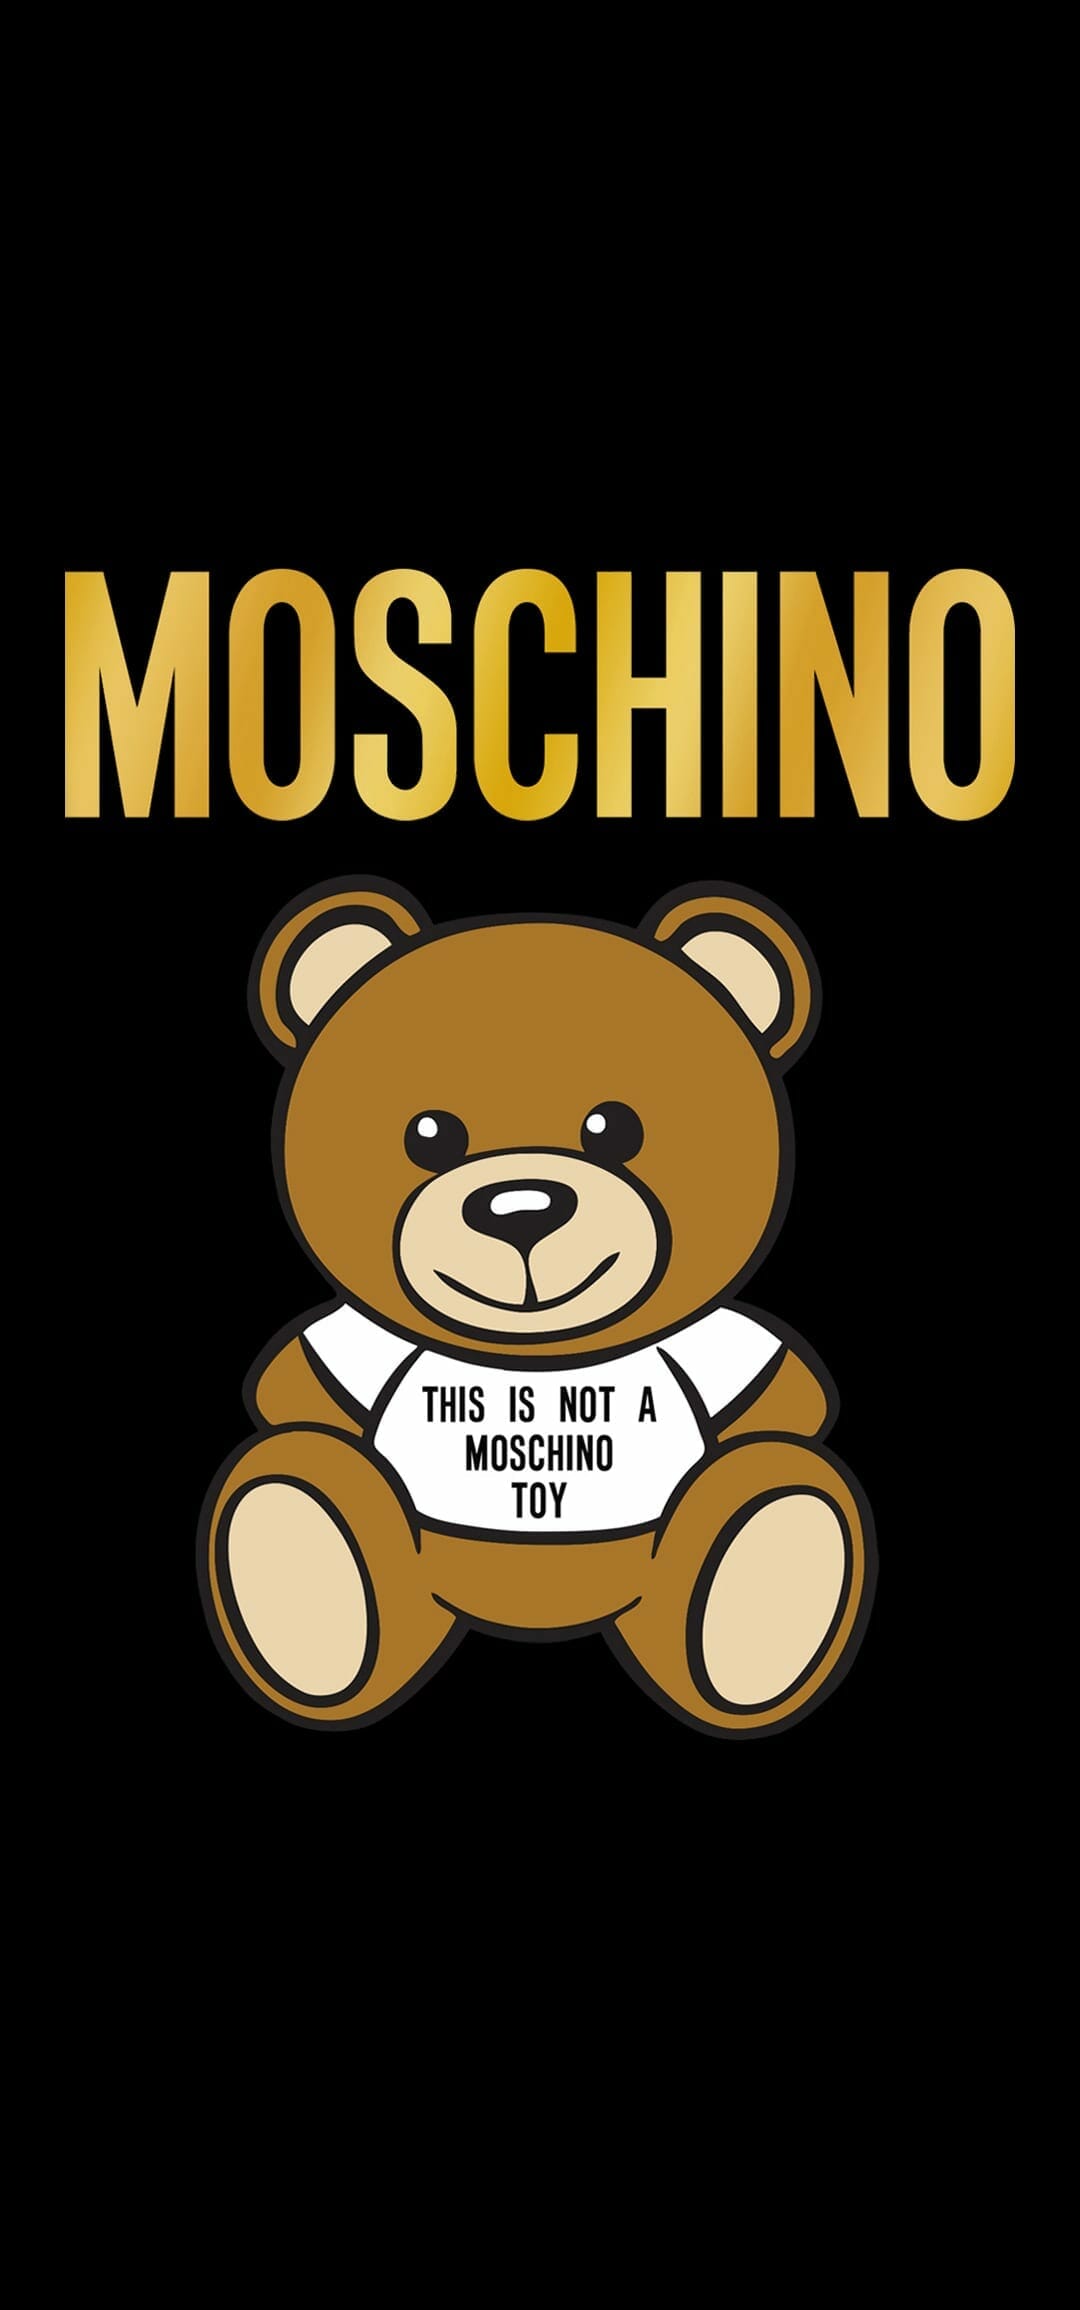 Honor V20 Moschino Edition Stock Wallpapers